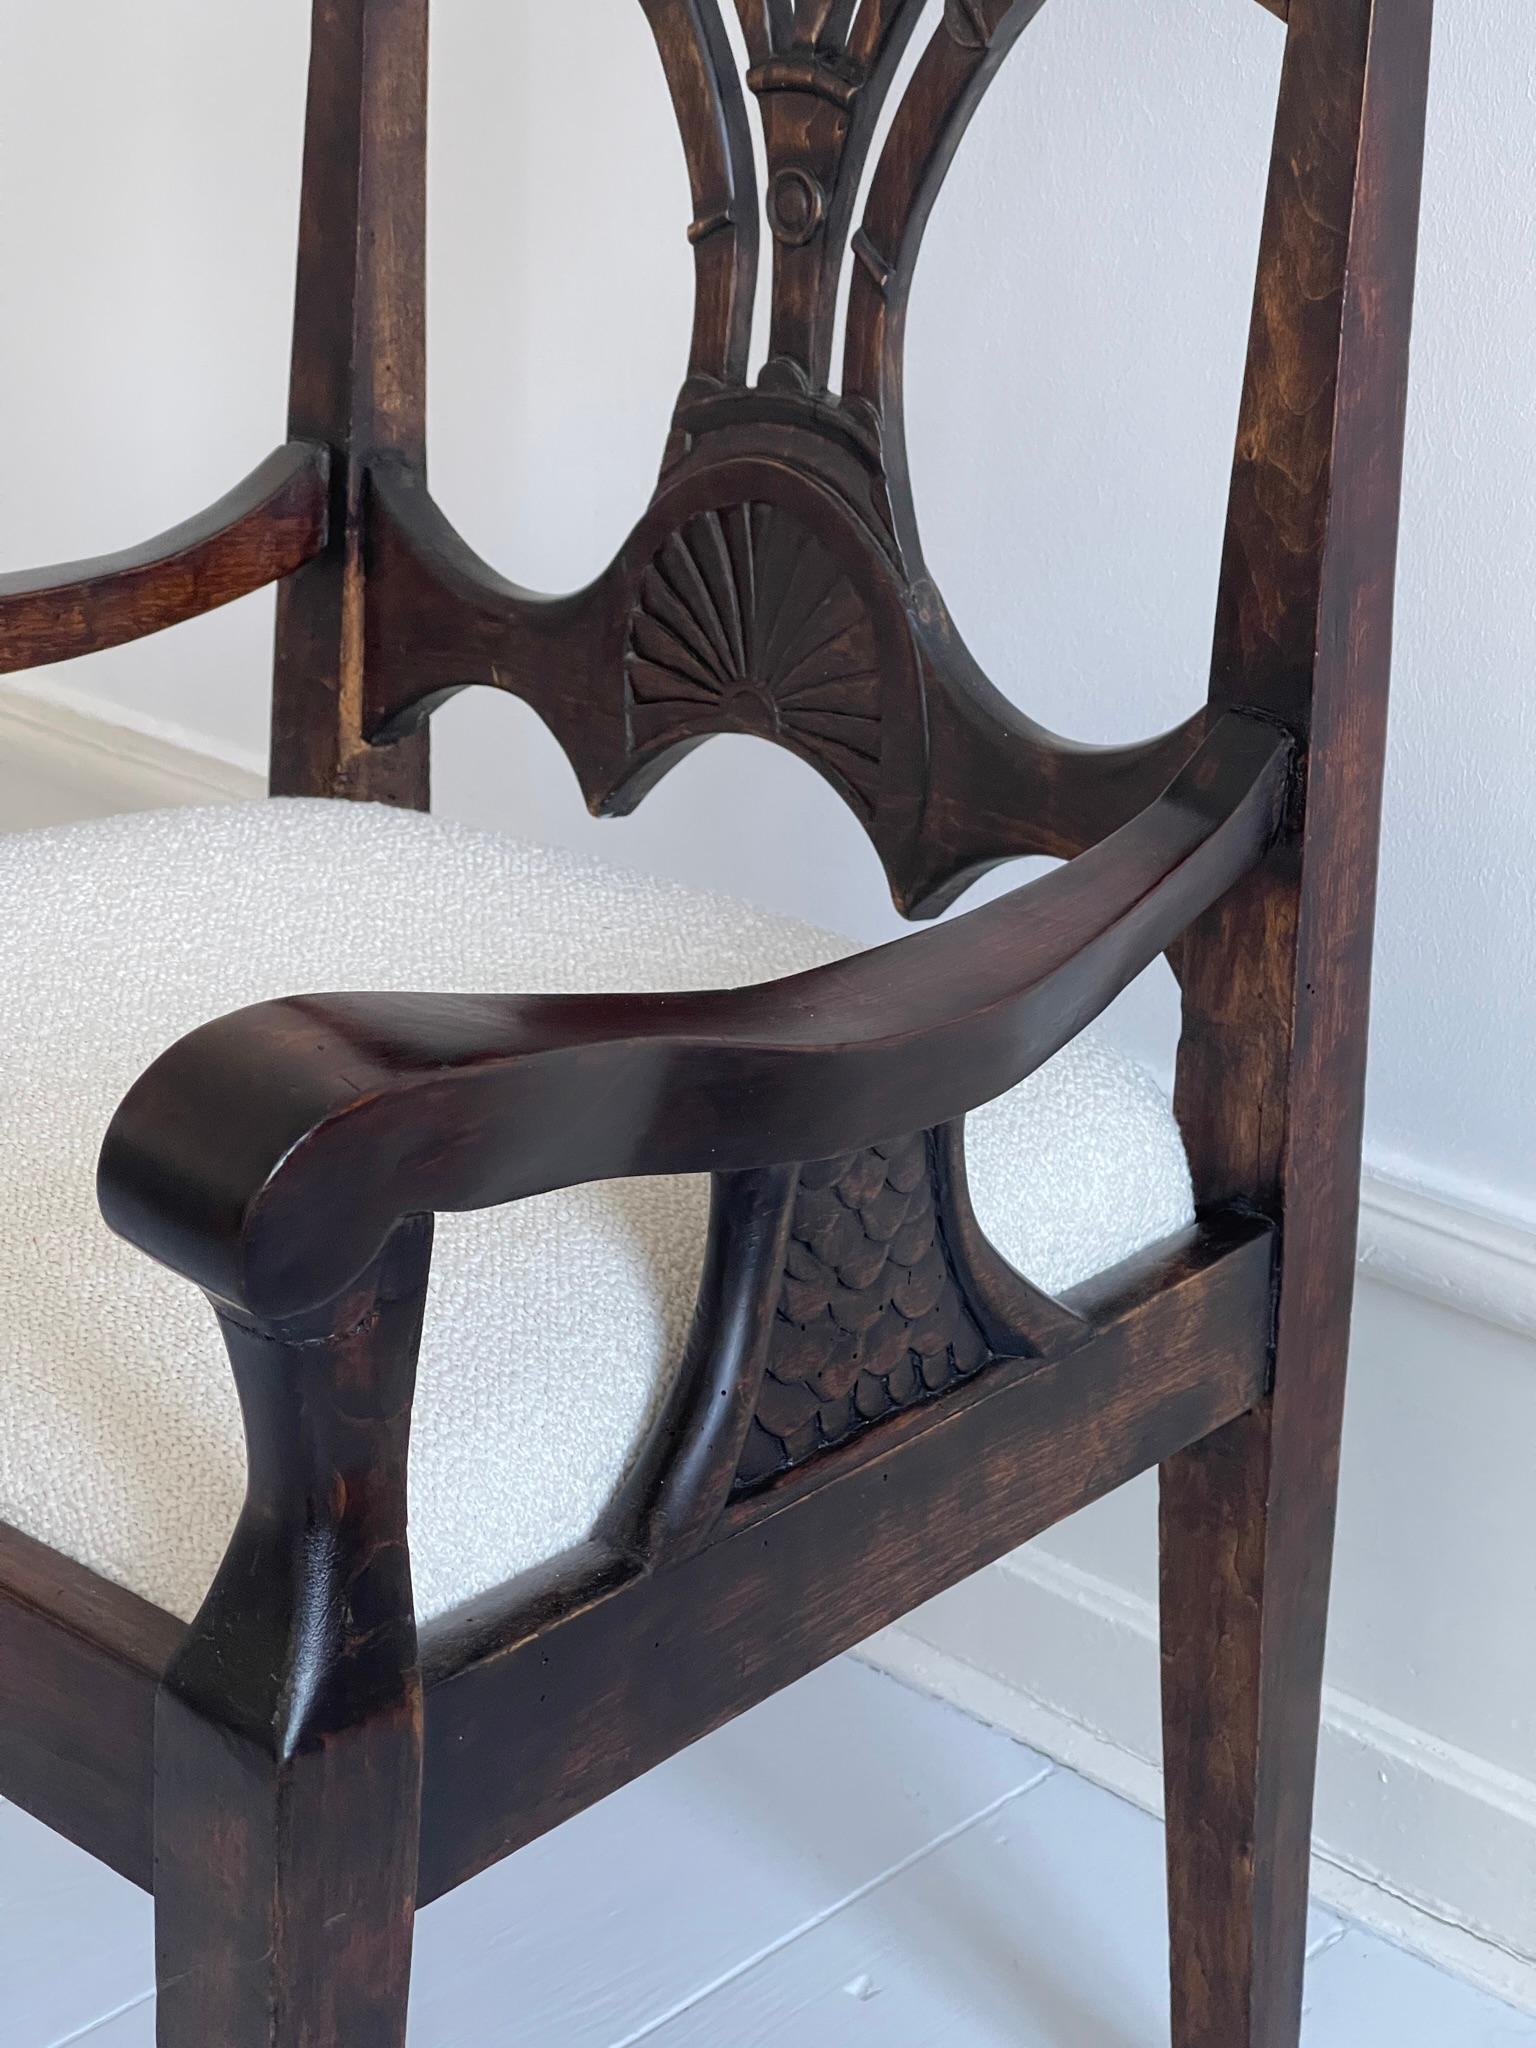 Art Nouveau Mid-19th Century Scandinavian Armchair in Stained Oak, reupholstered in Bouclé. For Sale